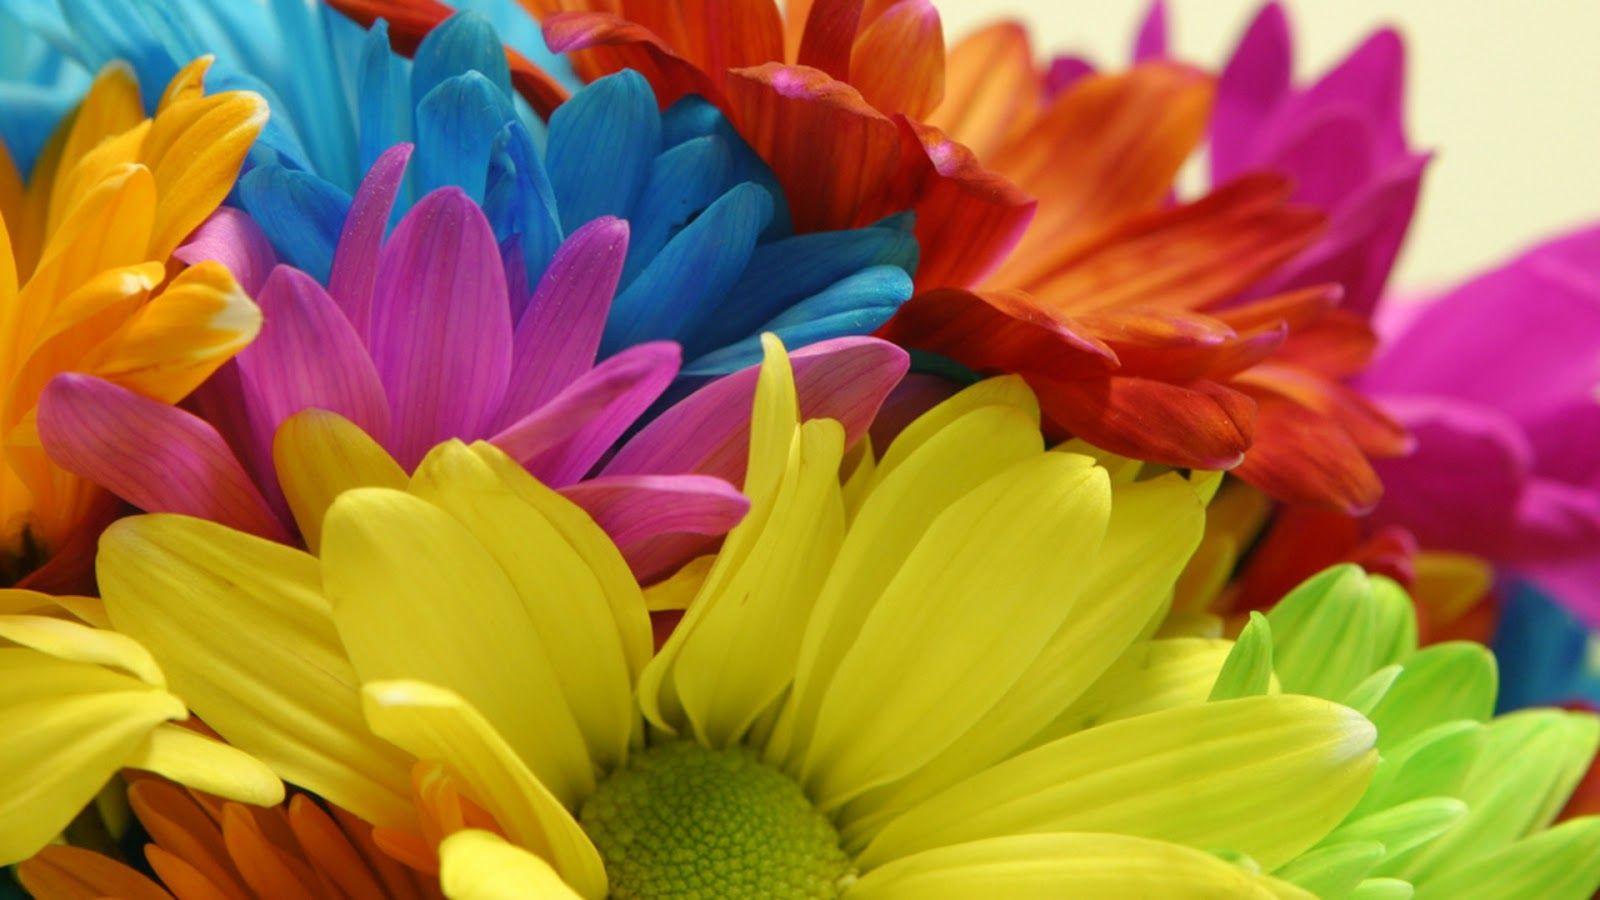 for changing: flowers, flower wallpaper, flower, colorful flowers